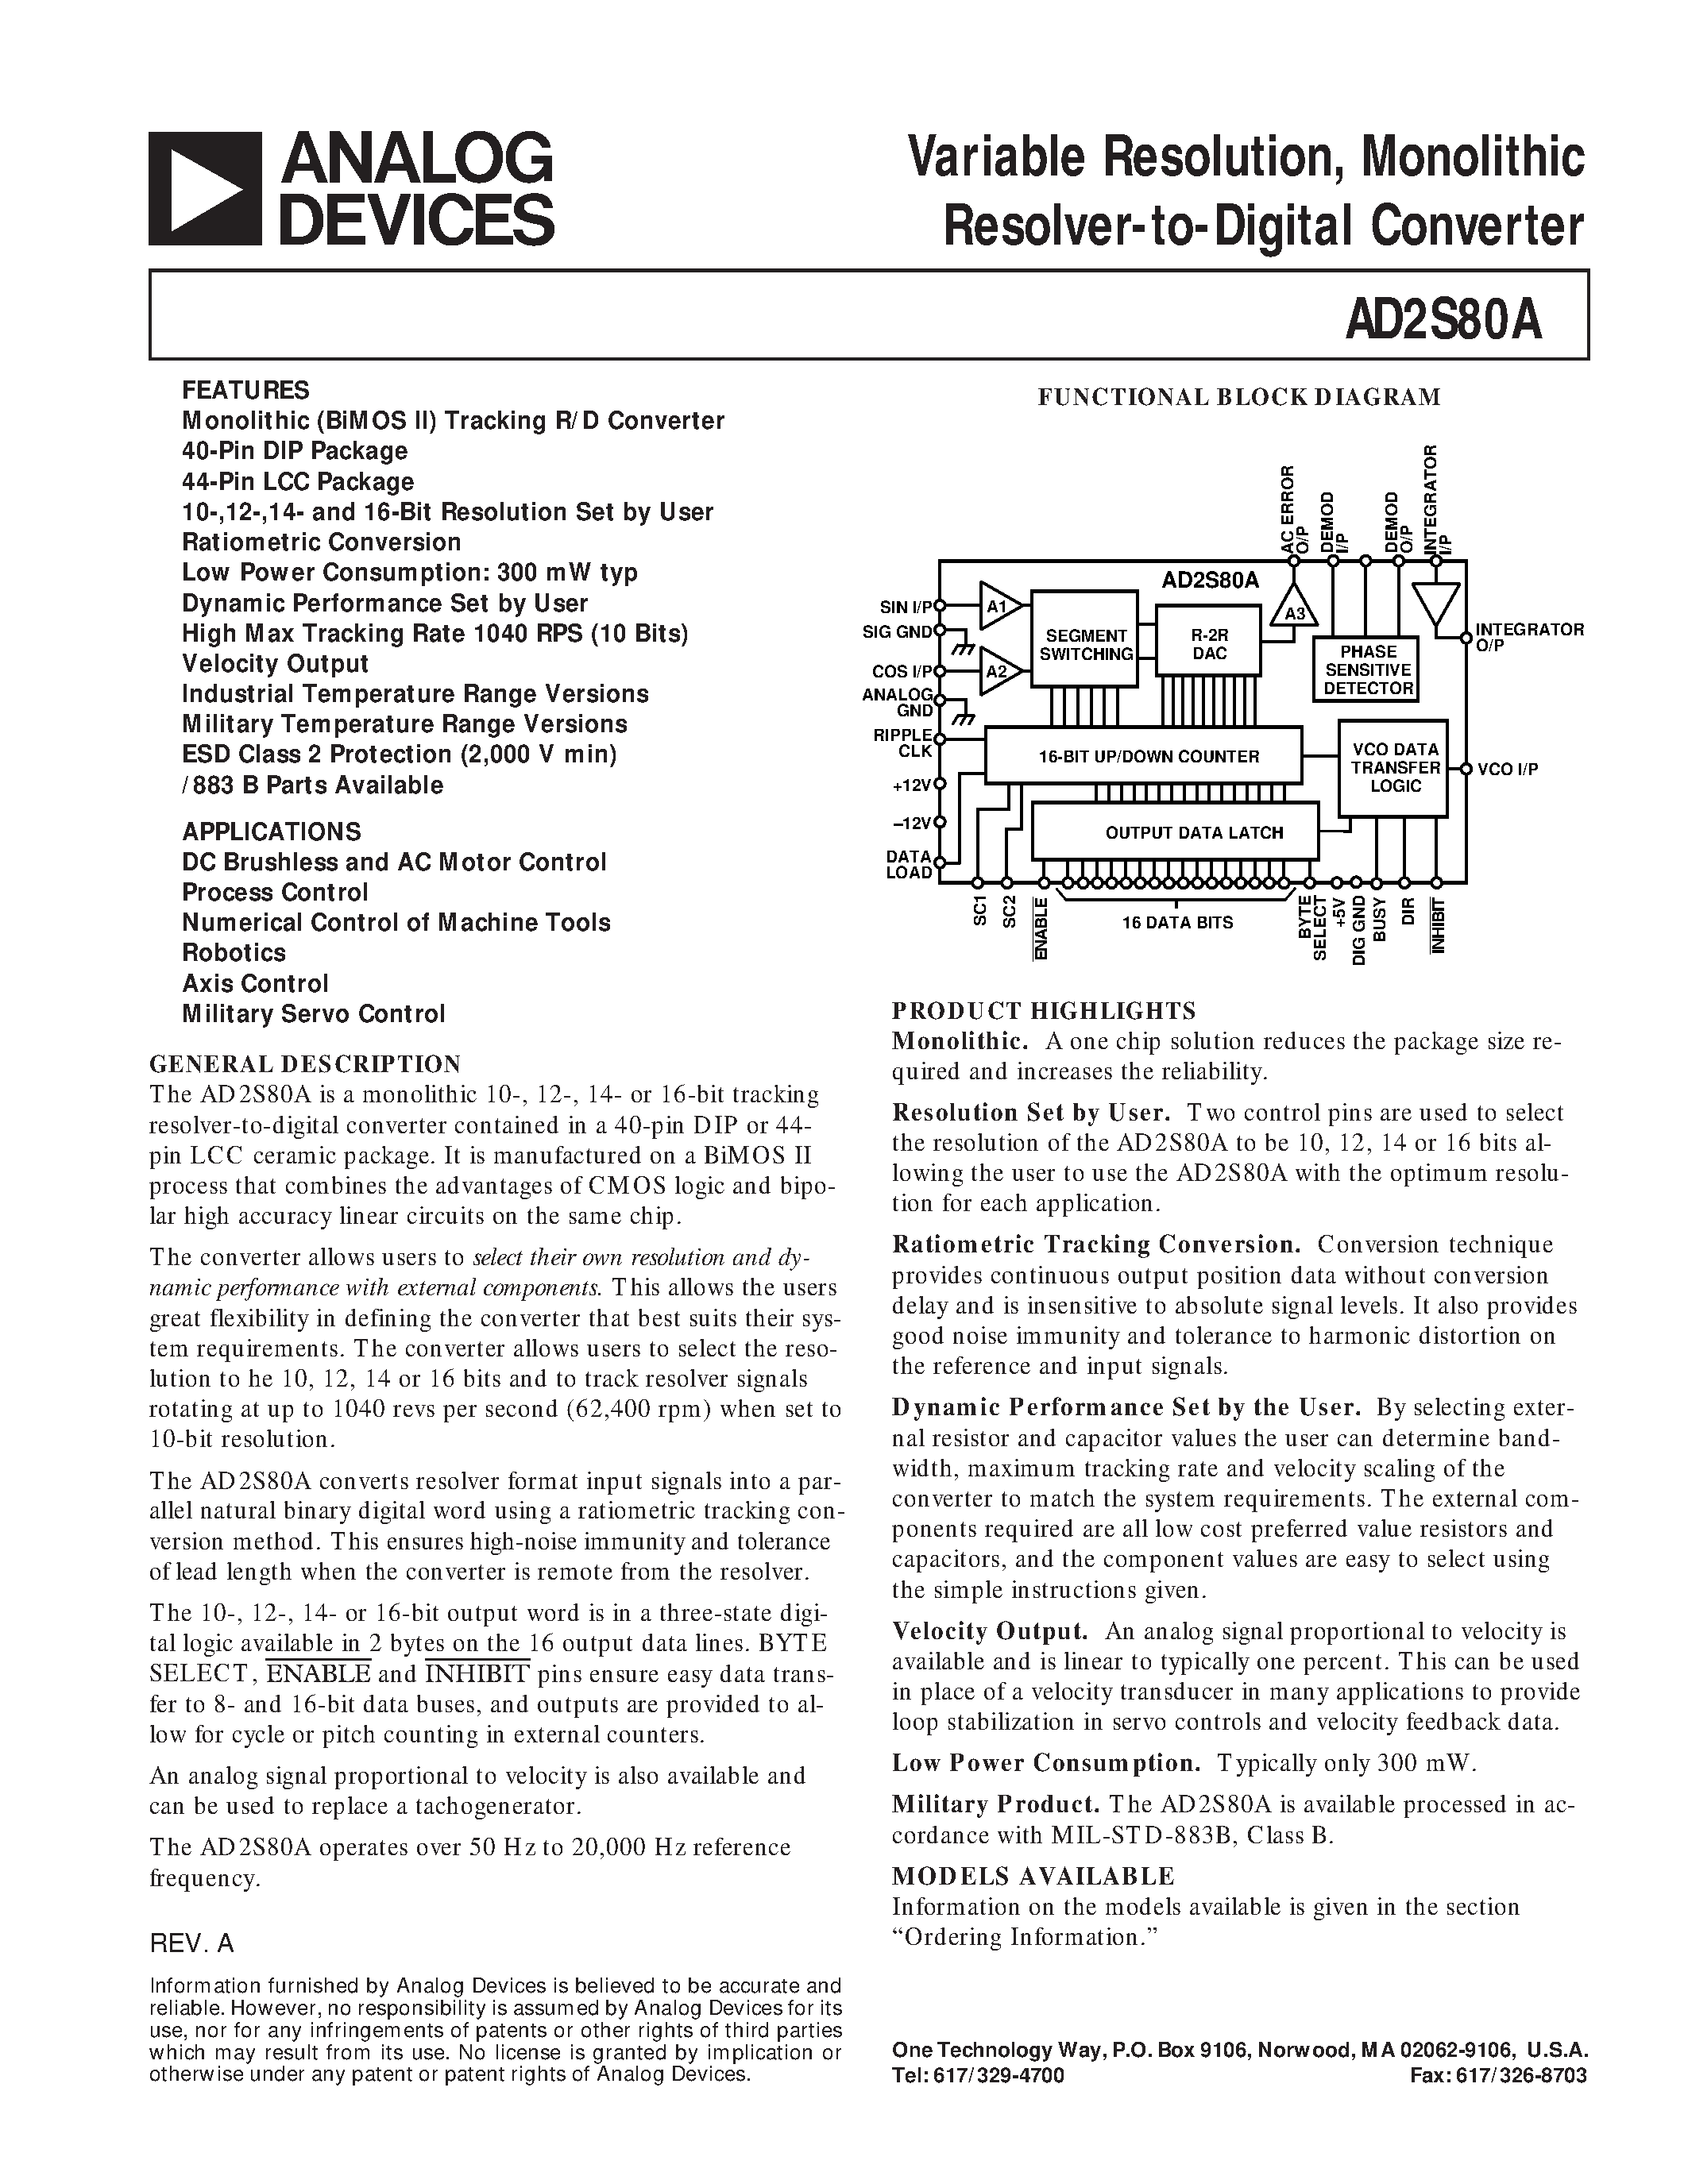 Datasheet AD2S80ASE/883B - Variable Resolution/ Monolithic Resolver-to-Digital Converter page 1